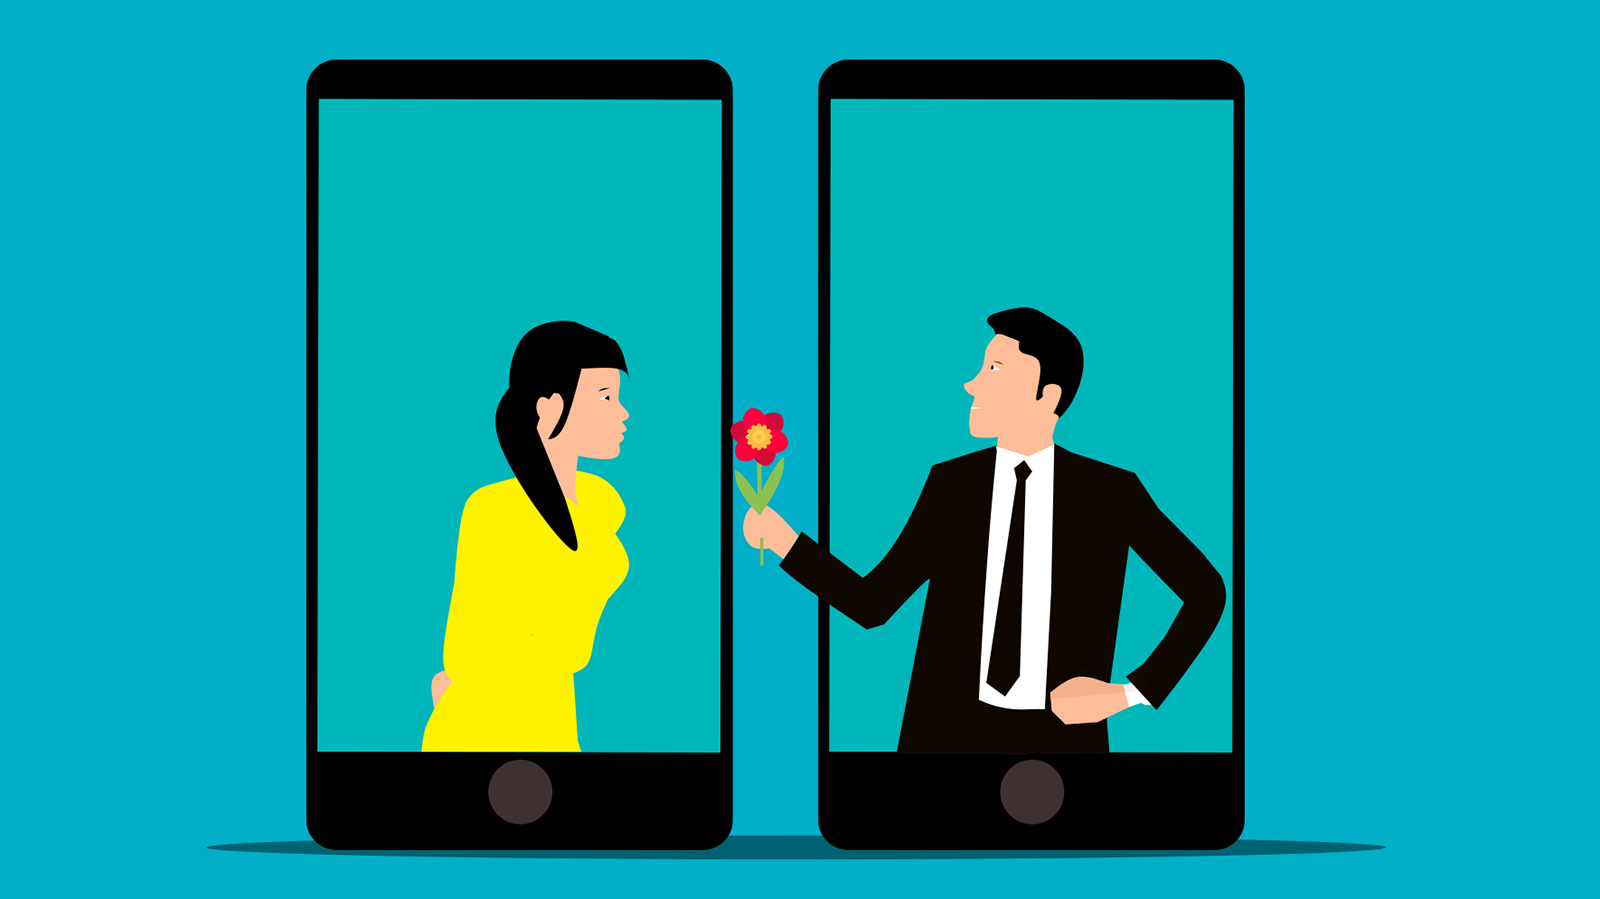 New dating apps — and 'in person' mixers — target religious and political  niches